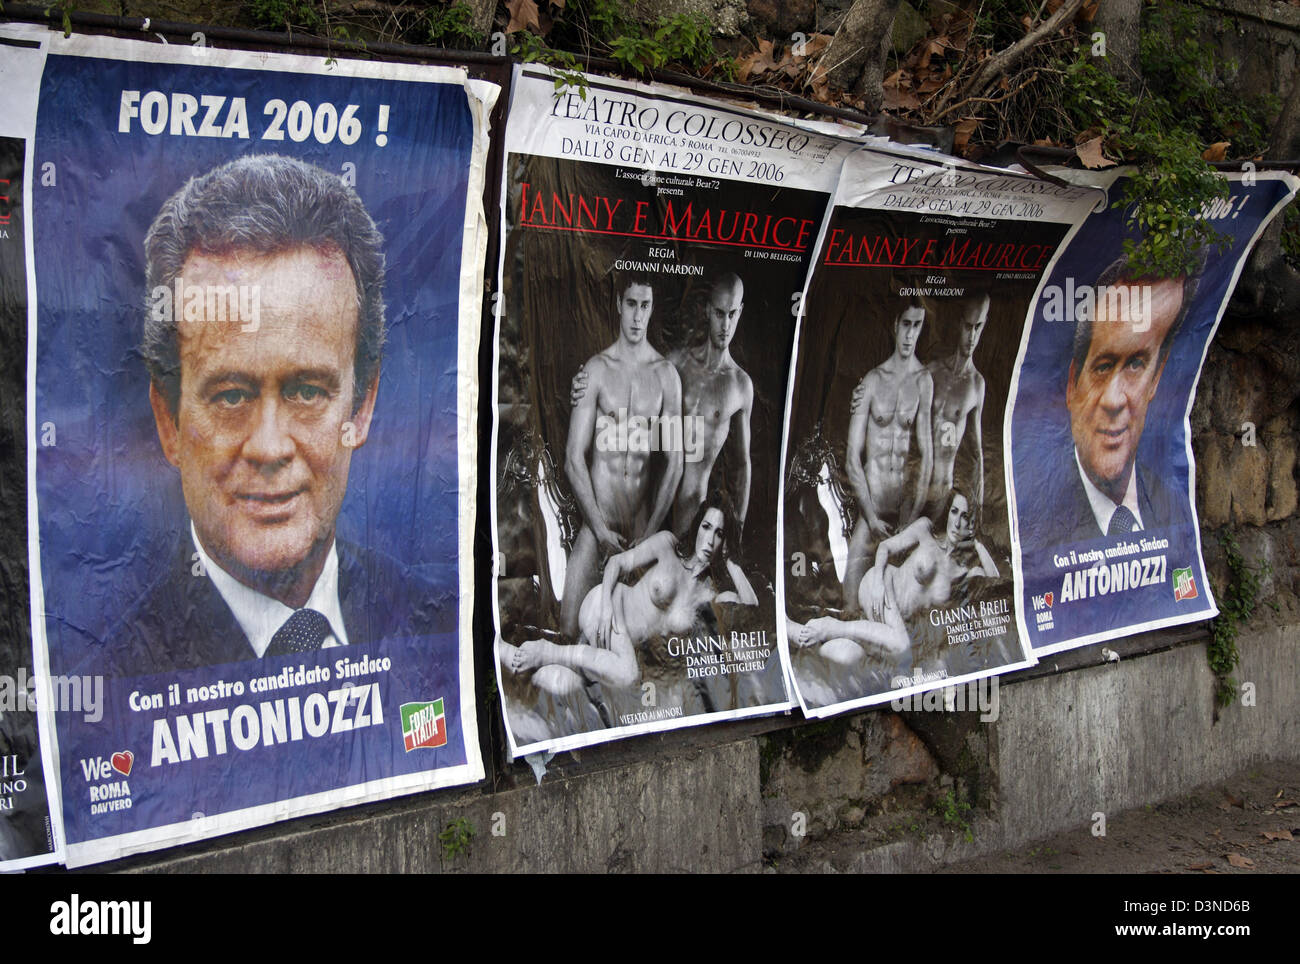 Election posters of government coalition party Forza Italia featuring their candidate Alfredo Antoniozzi in Rome, Italy, 08 January 2006. Italians will vote for a new parliament in the elections on 09 April 2006. Foto: Lars Halbauer Stock Photo